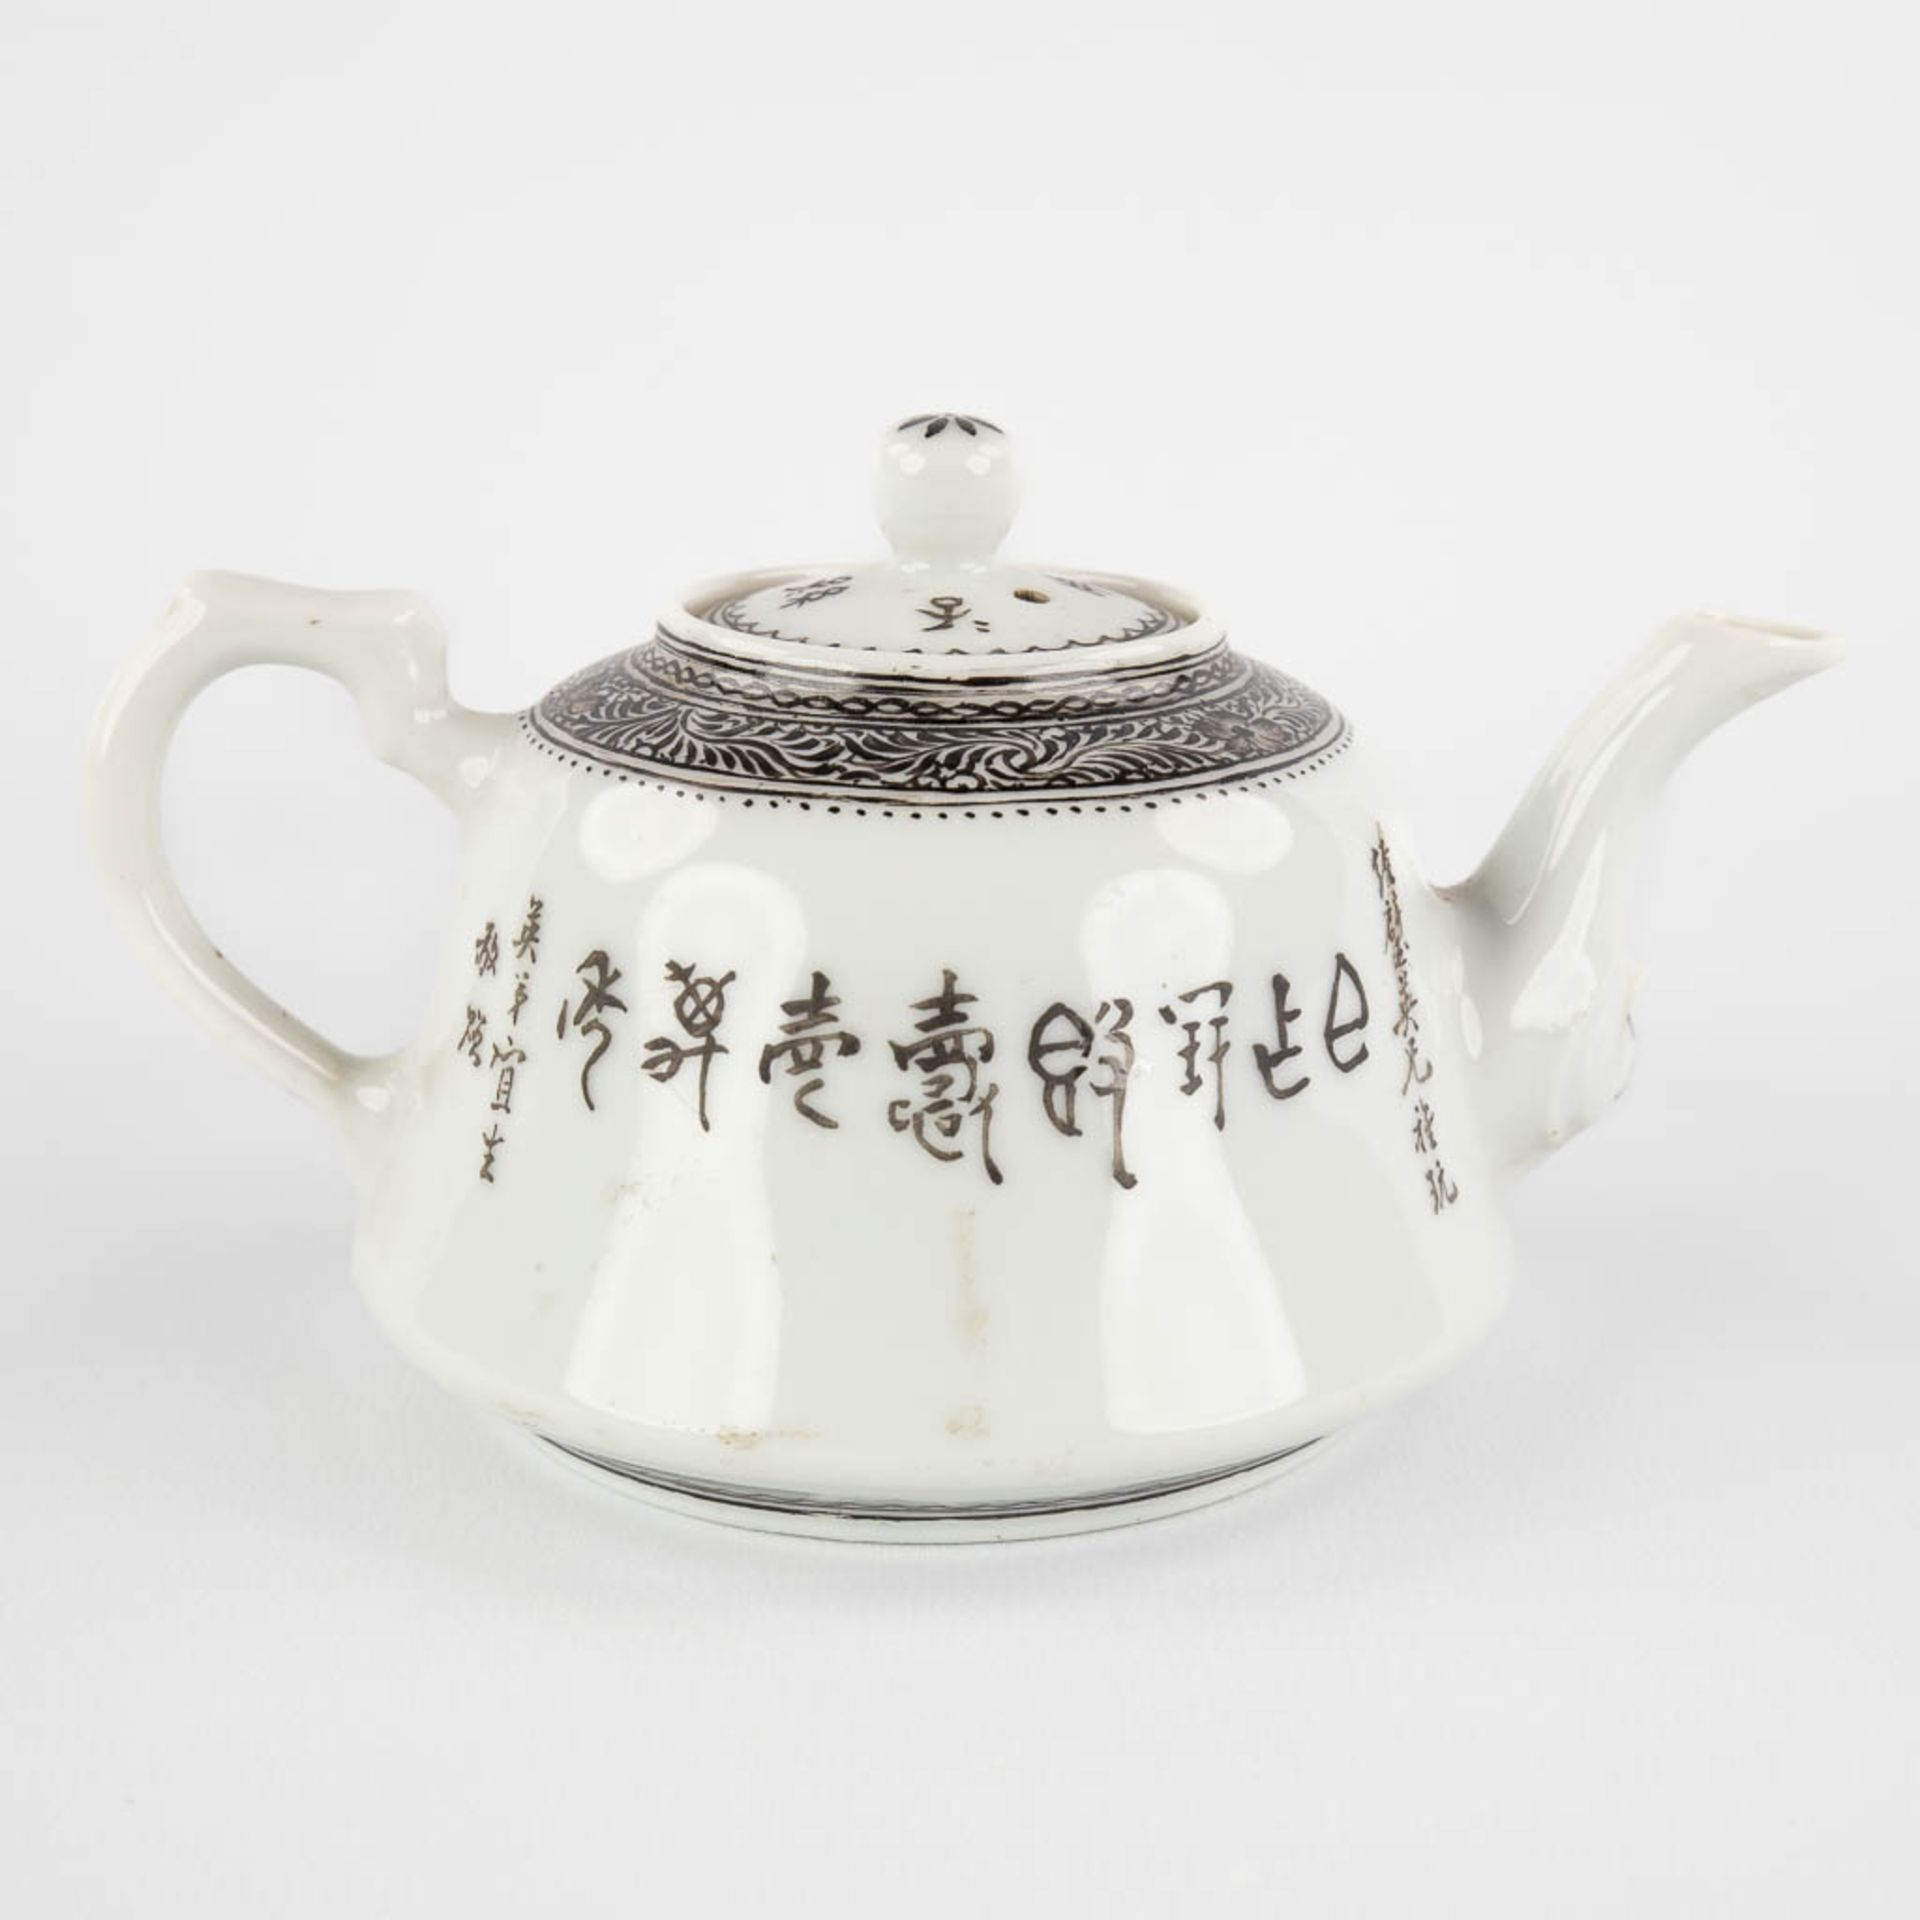 A Chinese teapot with landscape decor, 20th C. (D:11 x W:15 x H:9 cm) - Image 5 of 14